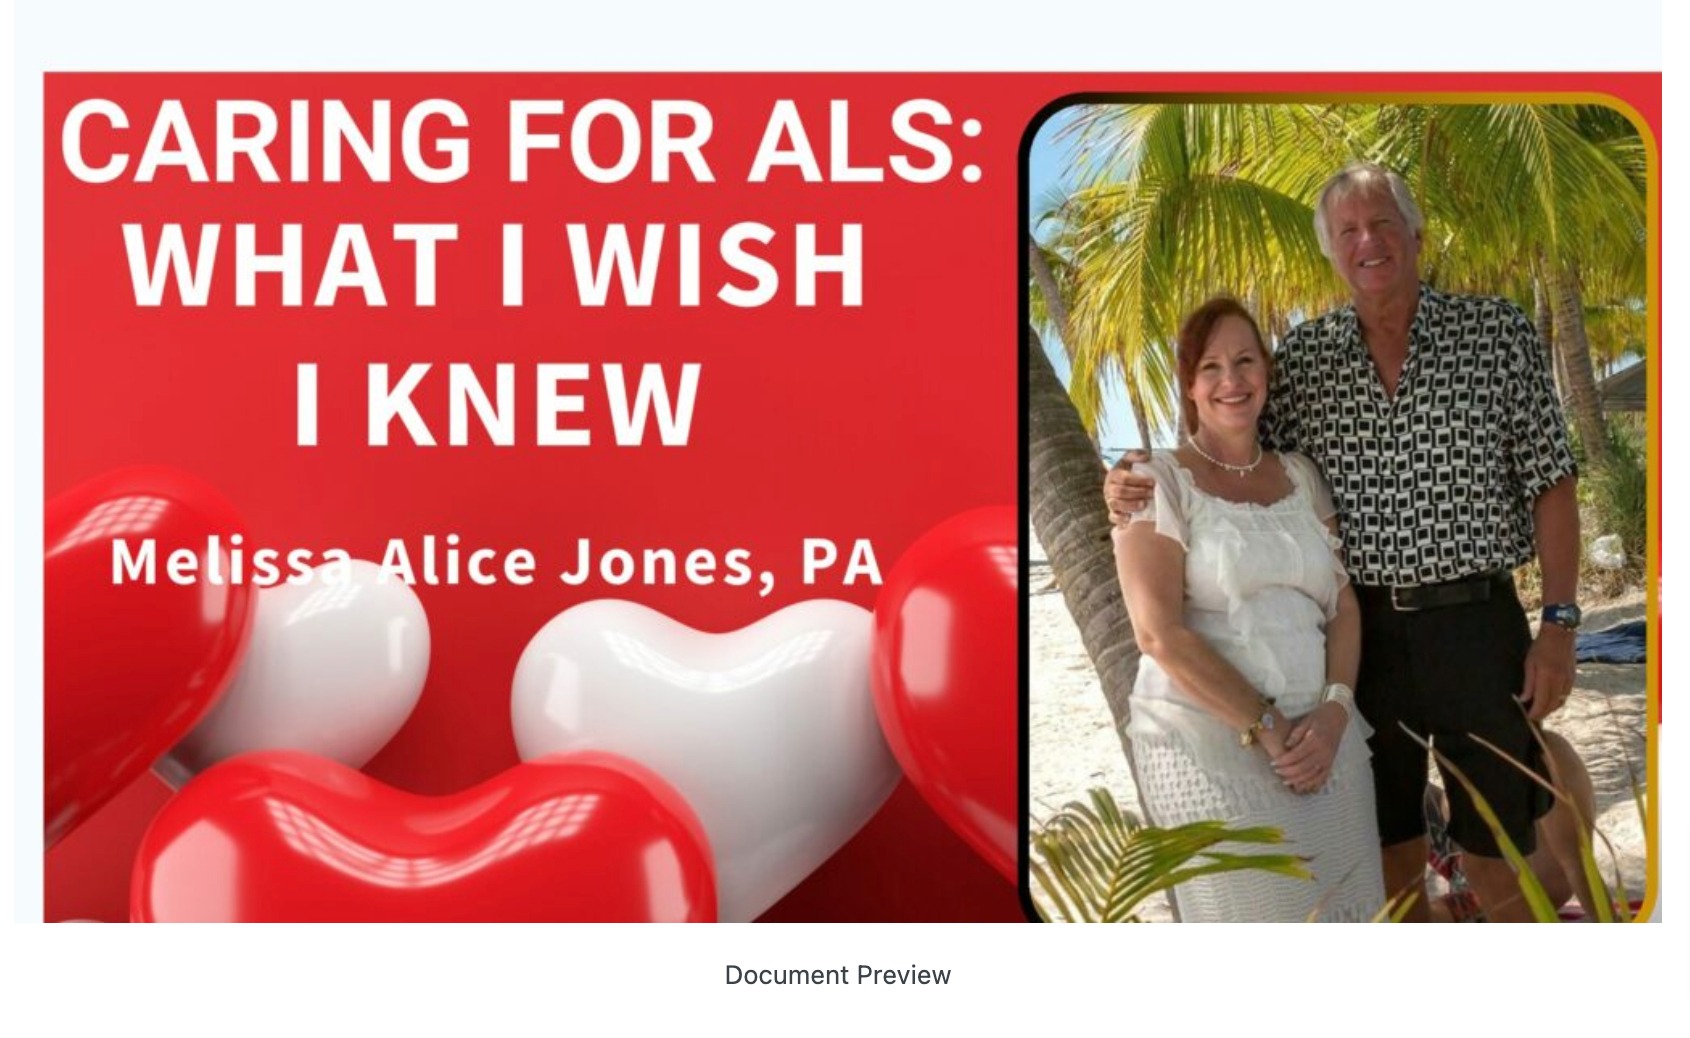 Caring for ALS: What I Wish I knew